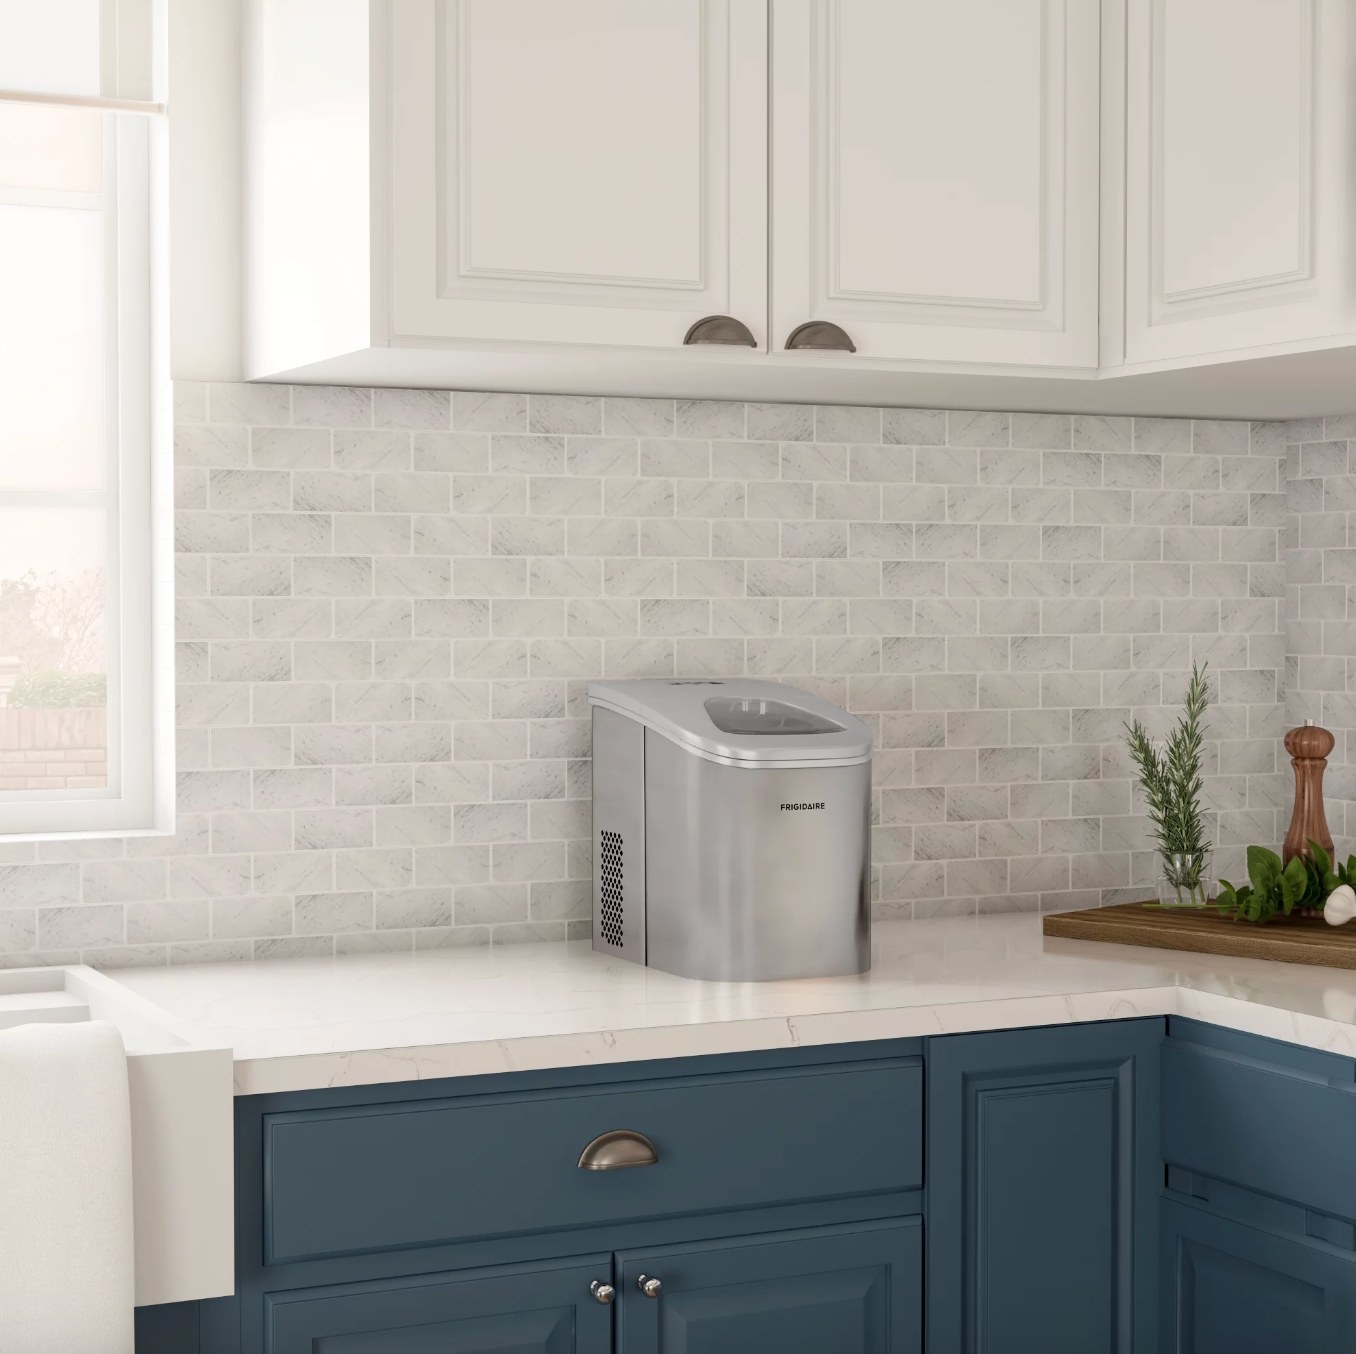 the silver ice maker on the counter in a decorated kitchen space